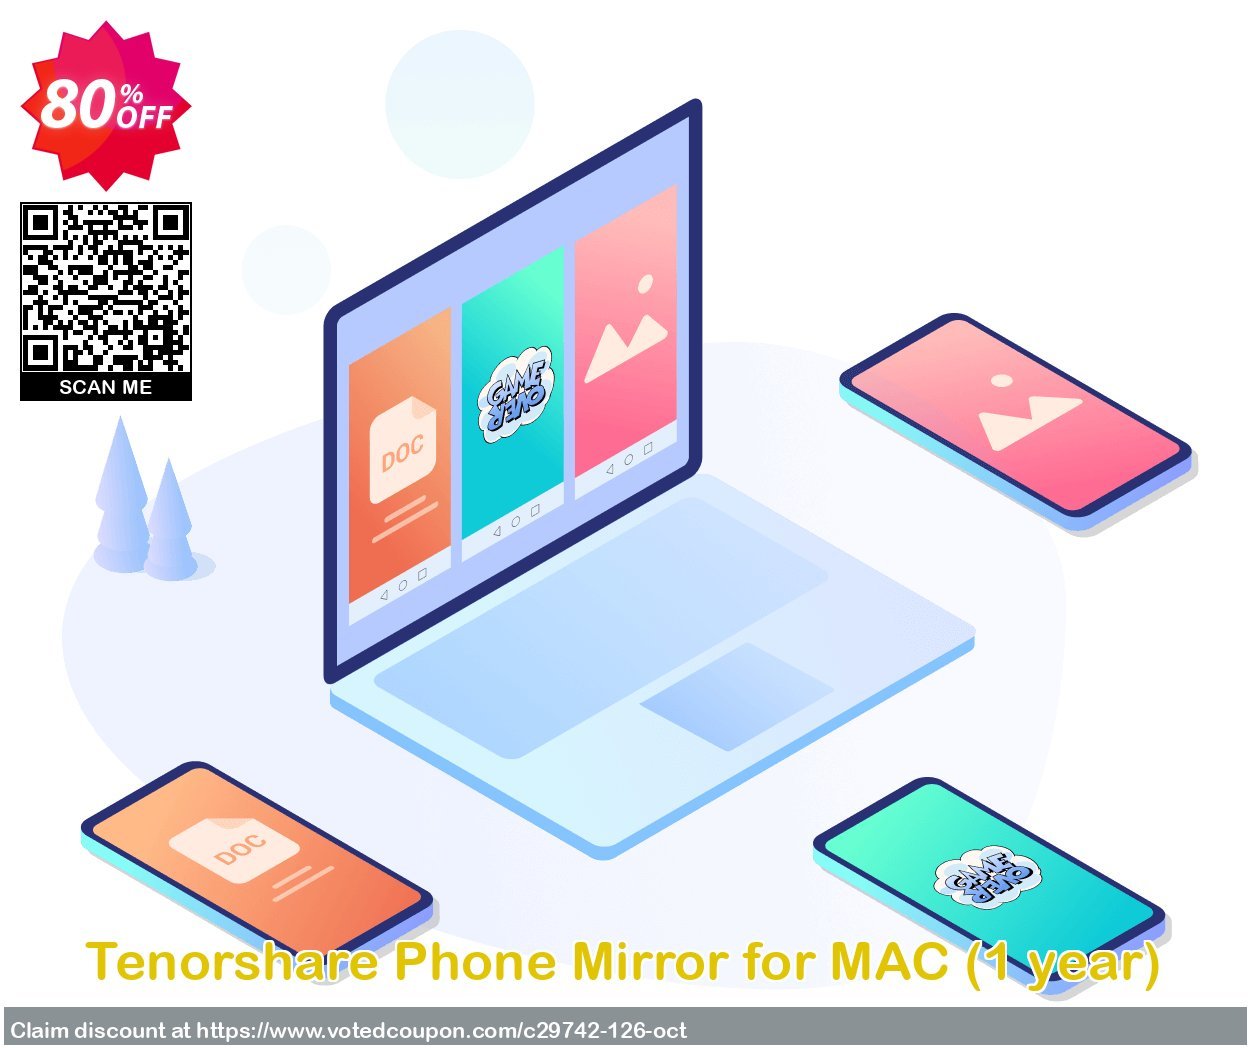 Tenorshare Phone Mirror for MAC, 1 Quarter  Coupon, discount 90% OFF Tenorshare Phone Mirror for MAC, verified. Promotion: Stunning promo code of Tenorshare Phone Mirror for MAC, tested & approved